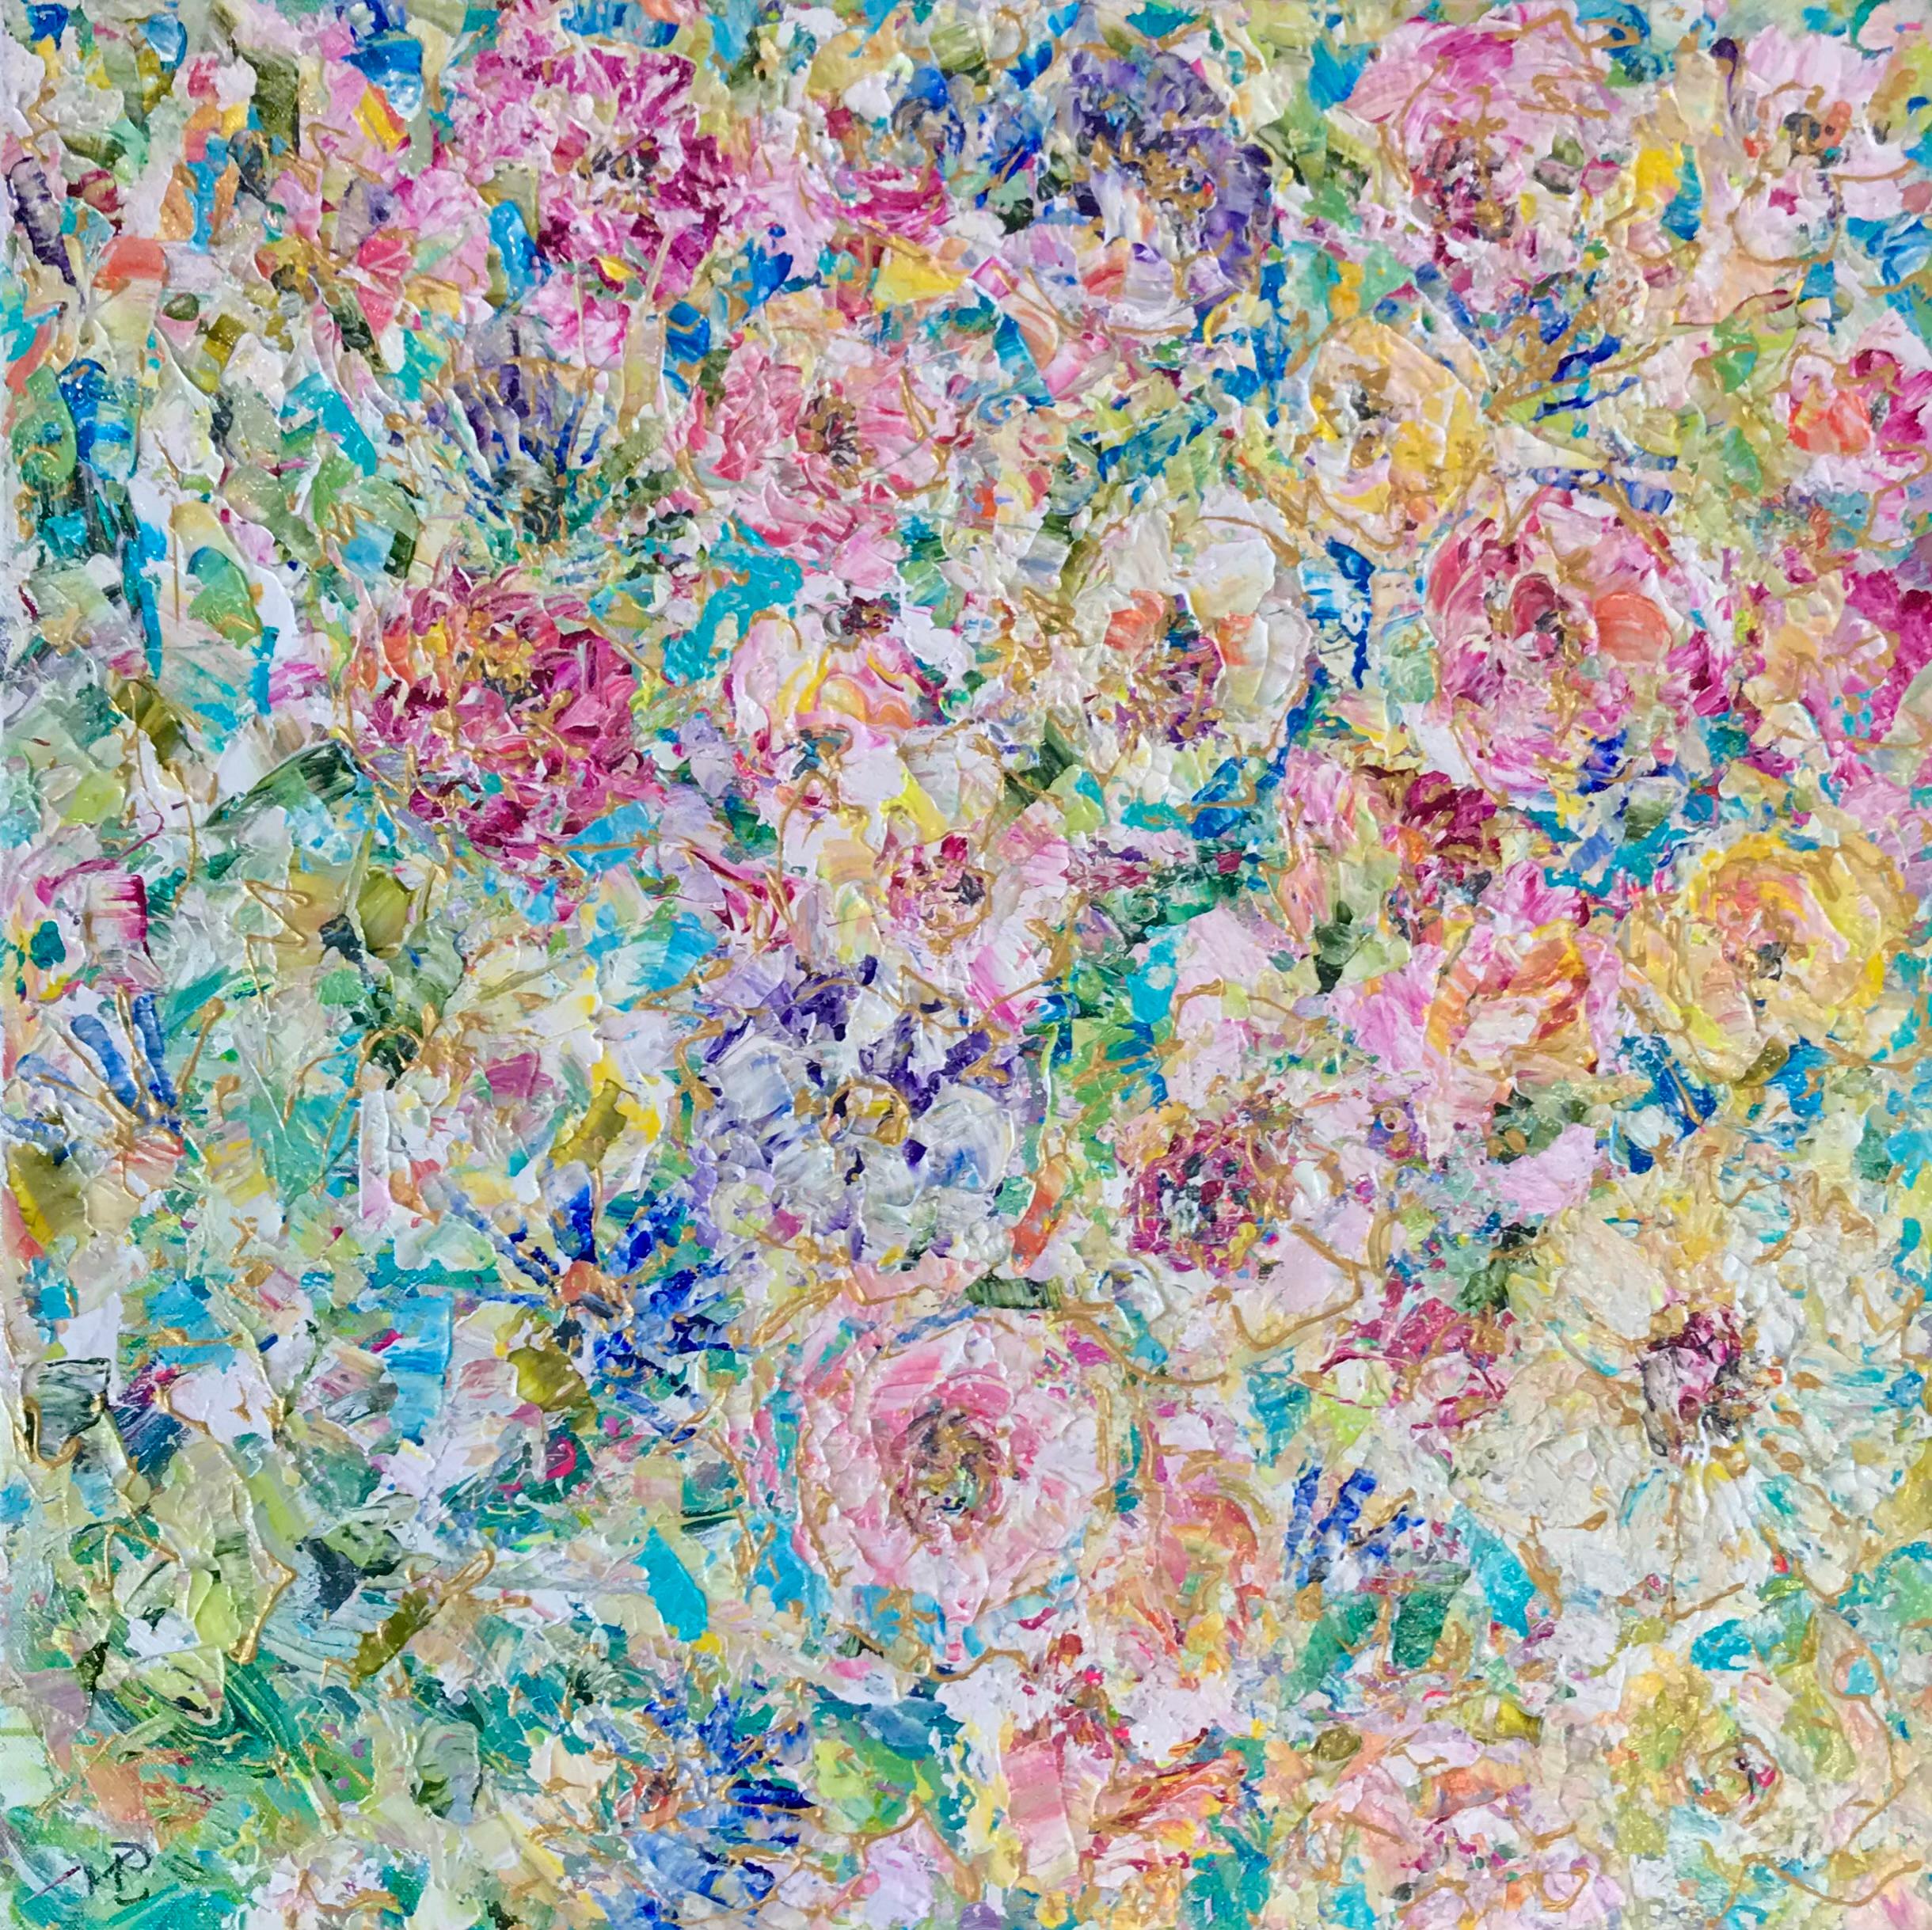 Jan Rogers Figurative Painting - Floral Confetti